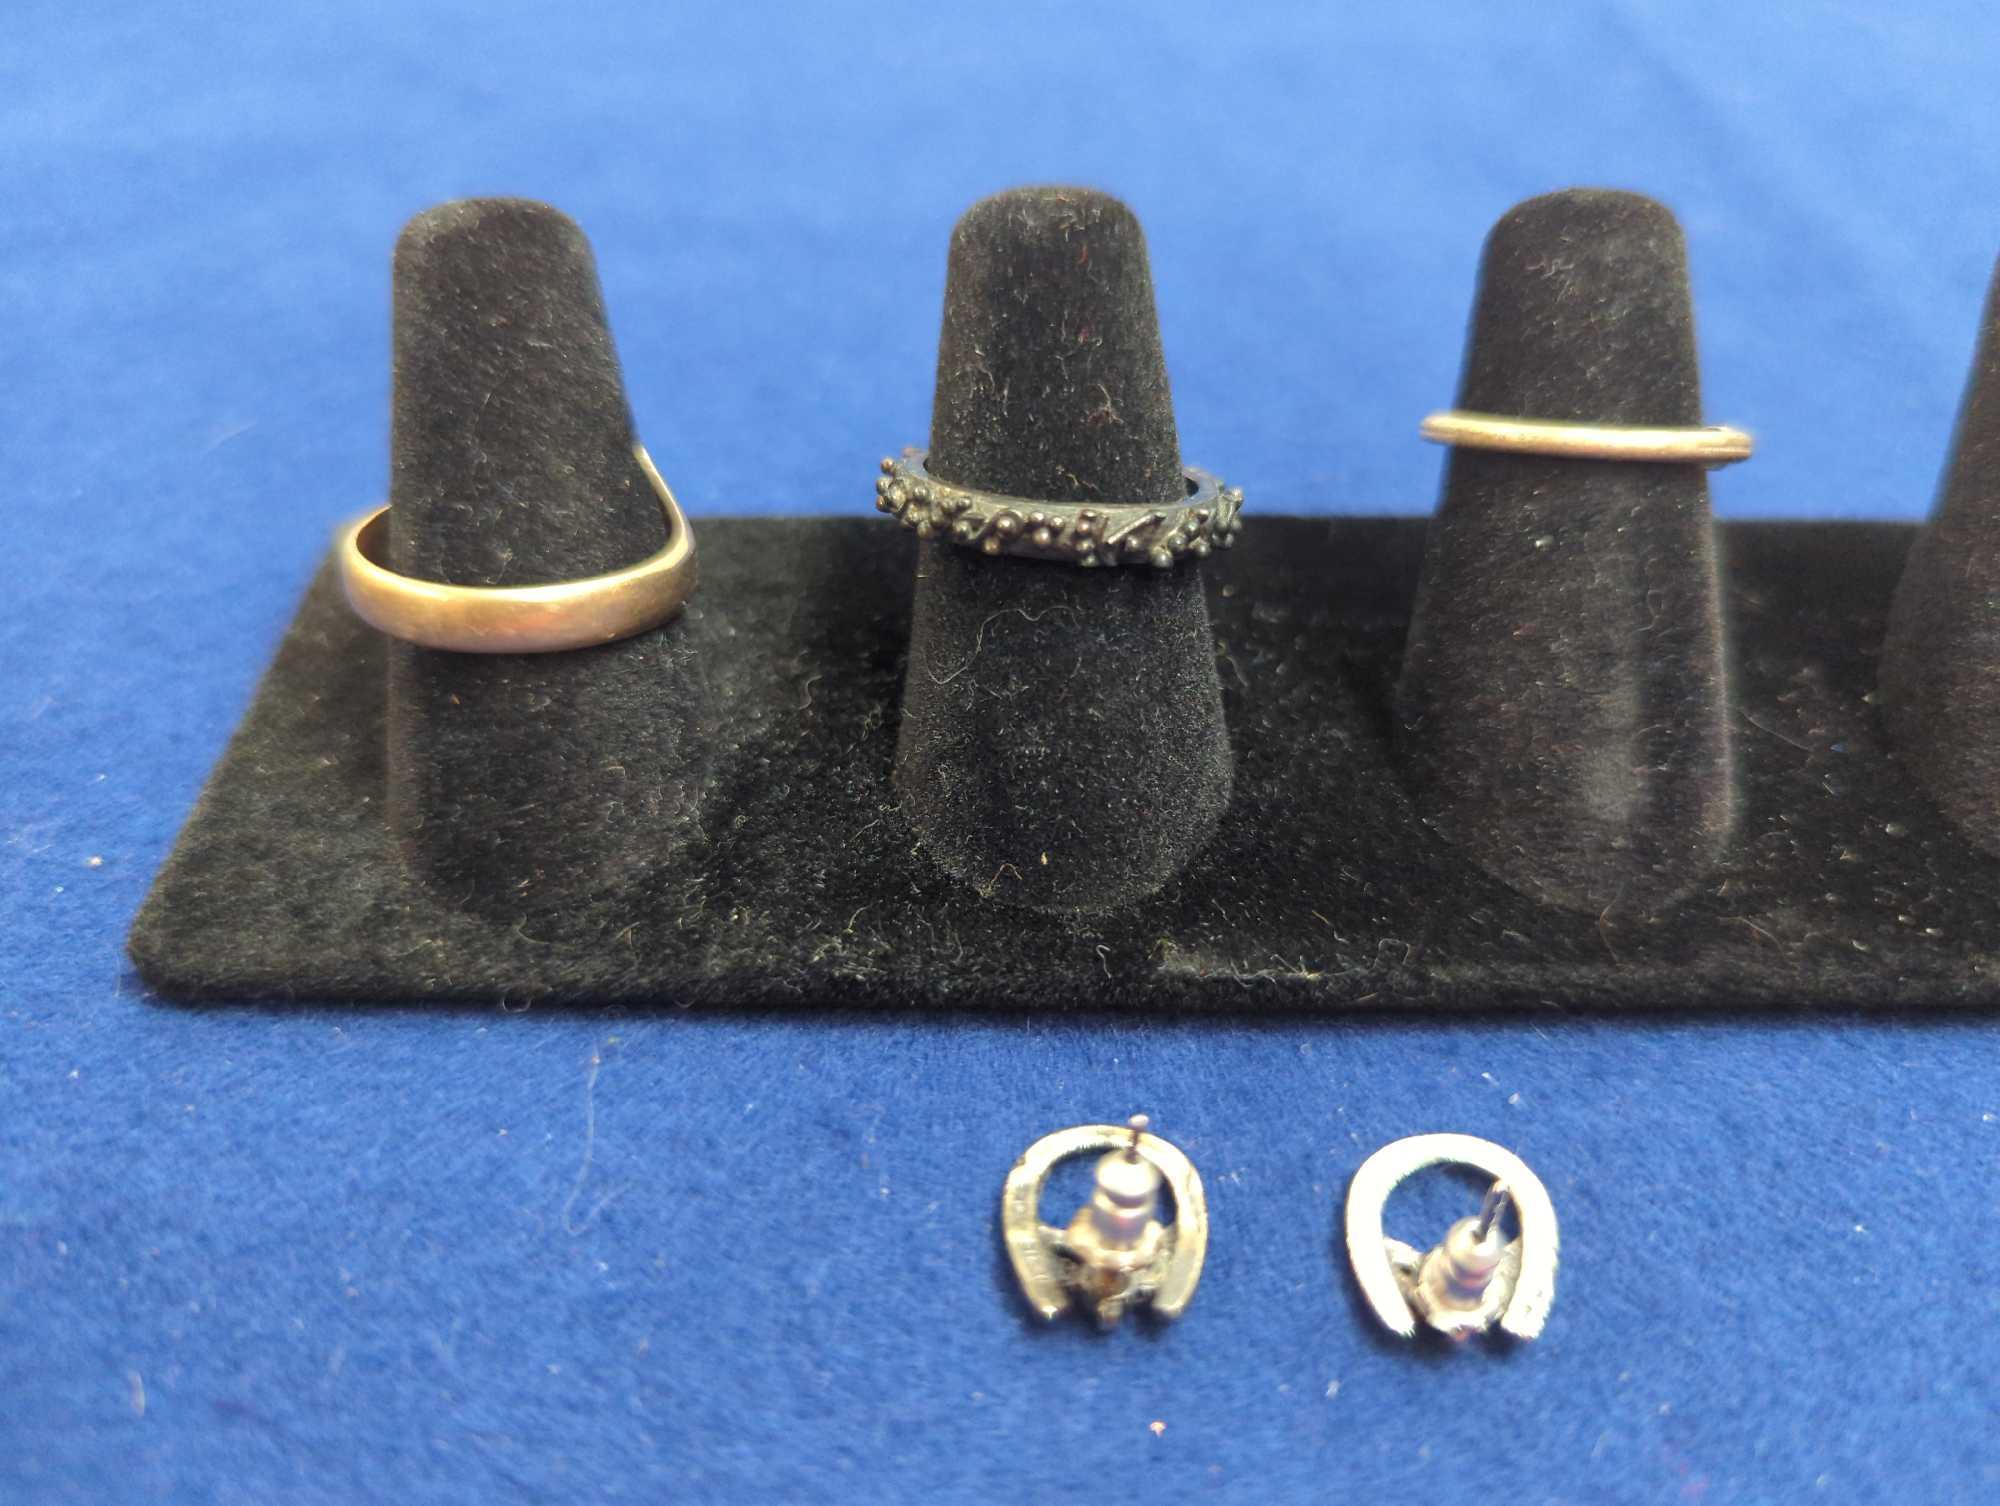 RINGS SIZE 9,SIZE 6, SIZE 5 LEFT TO RIGHT 1 MISSING STONE, PIERCED EARRINGS STERLING